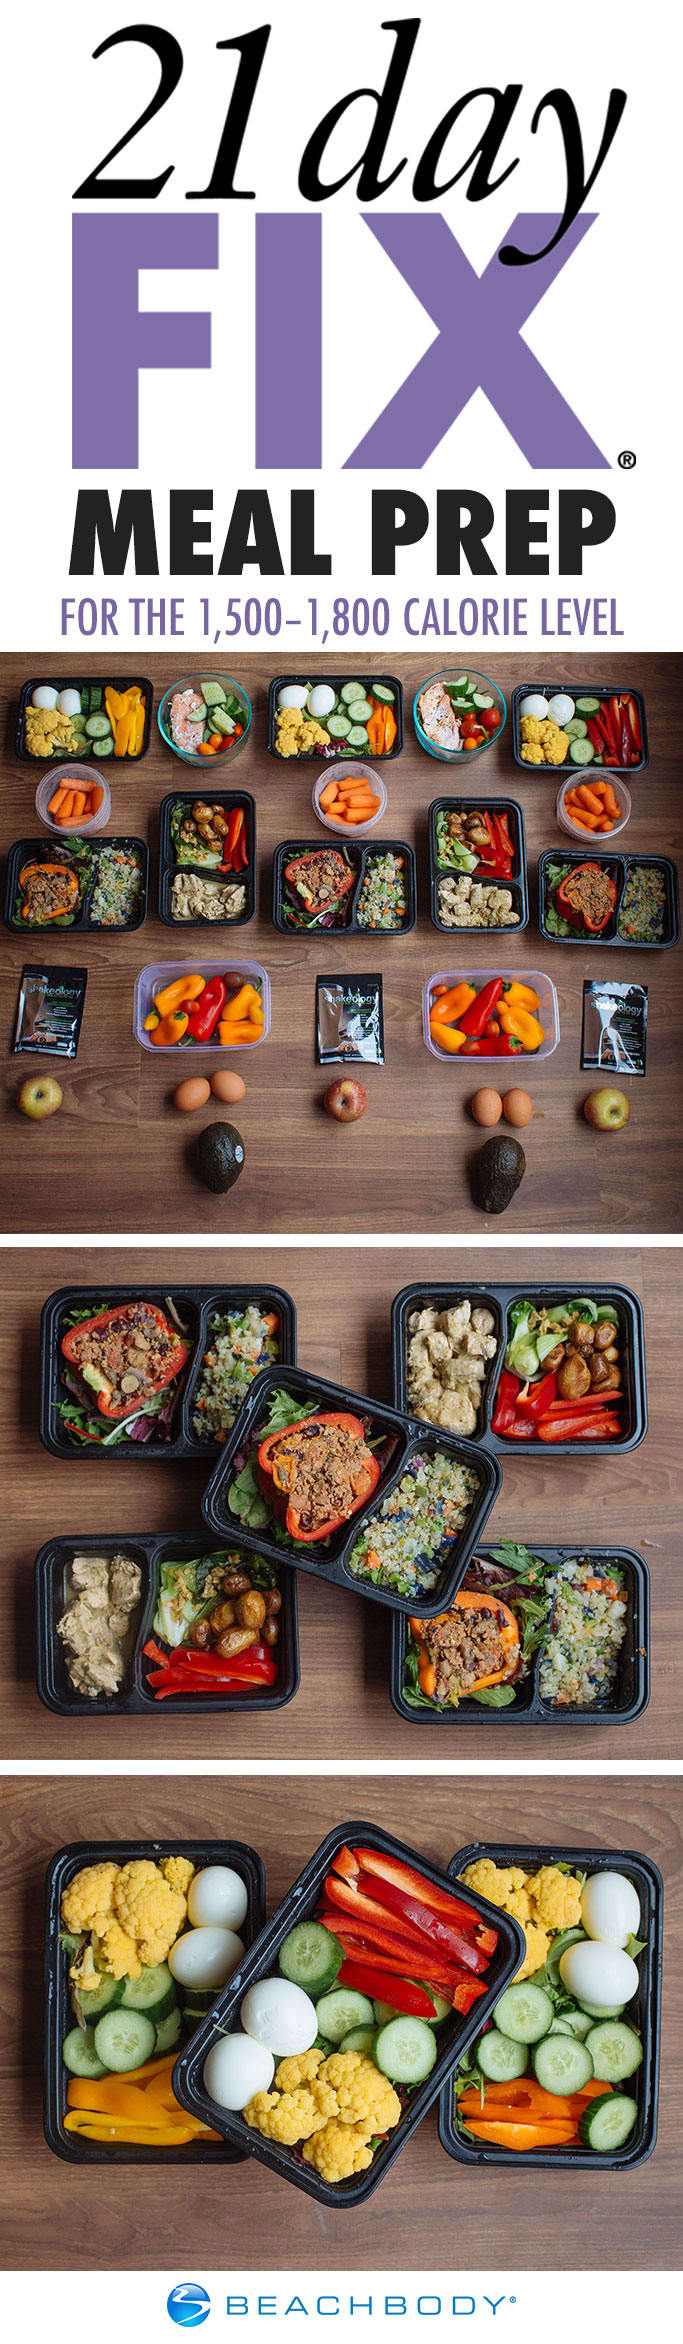 Meal Prep with Taco-Style Stuffed Peppers and Chicken Curry for the 21 Day Fix 1,500–1,800 Calorie Level #mealprep #mealplanning #21dayfix #21dayfixmealprep #21dayfixideas #21dayfixrecipes #healthyeating